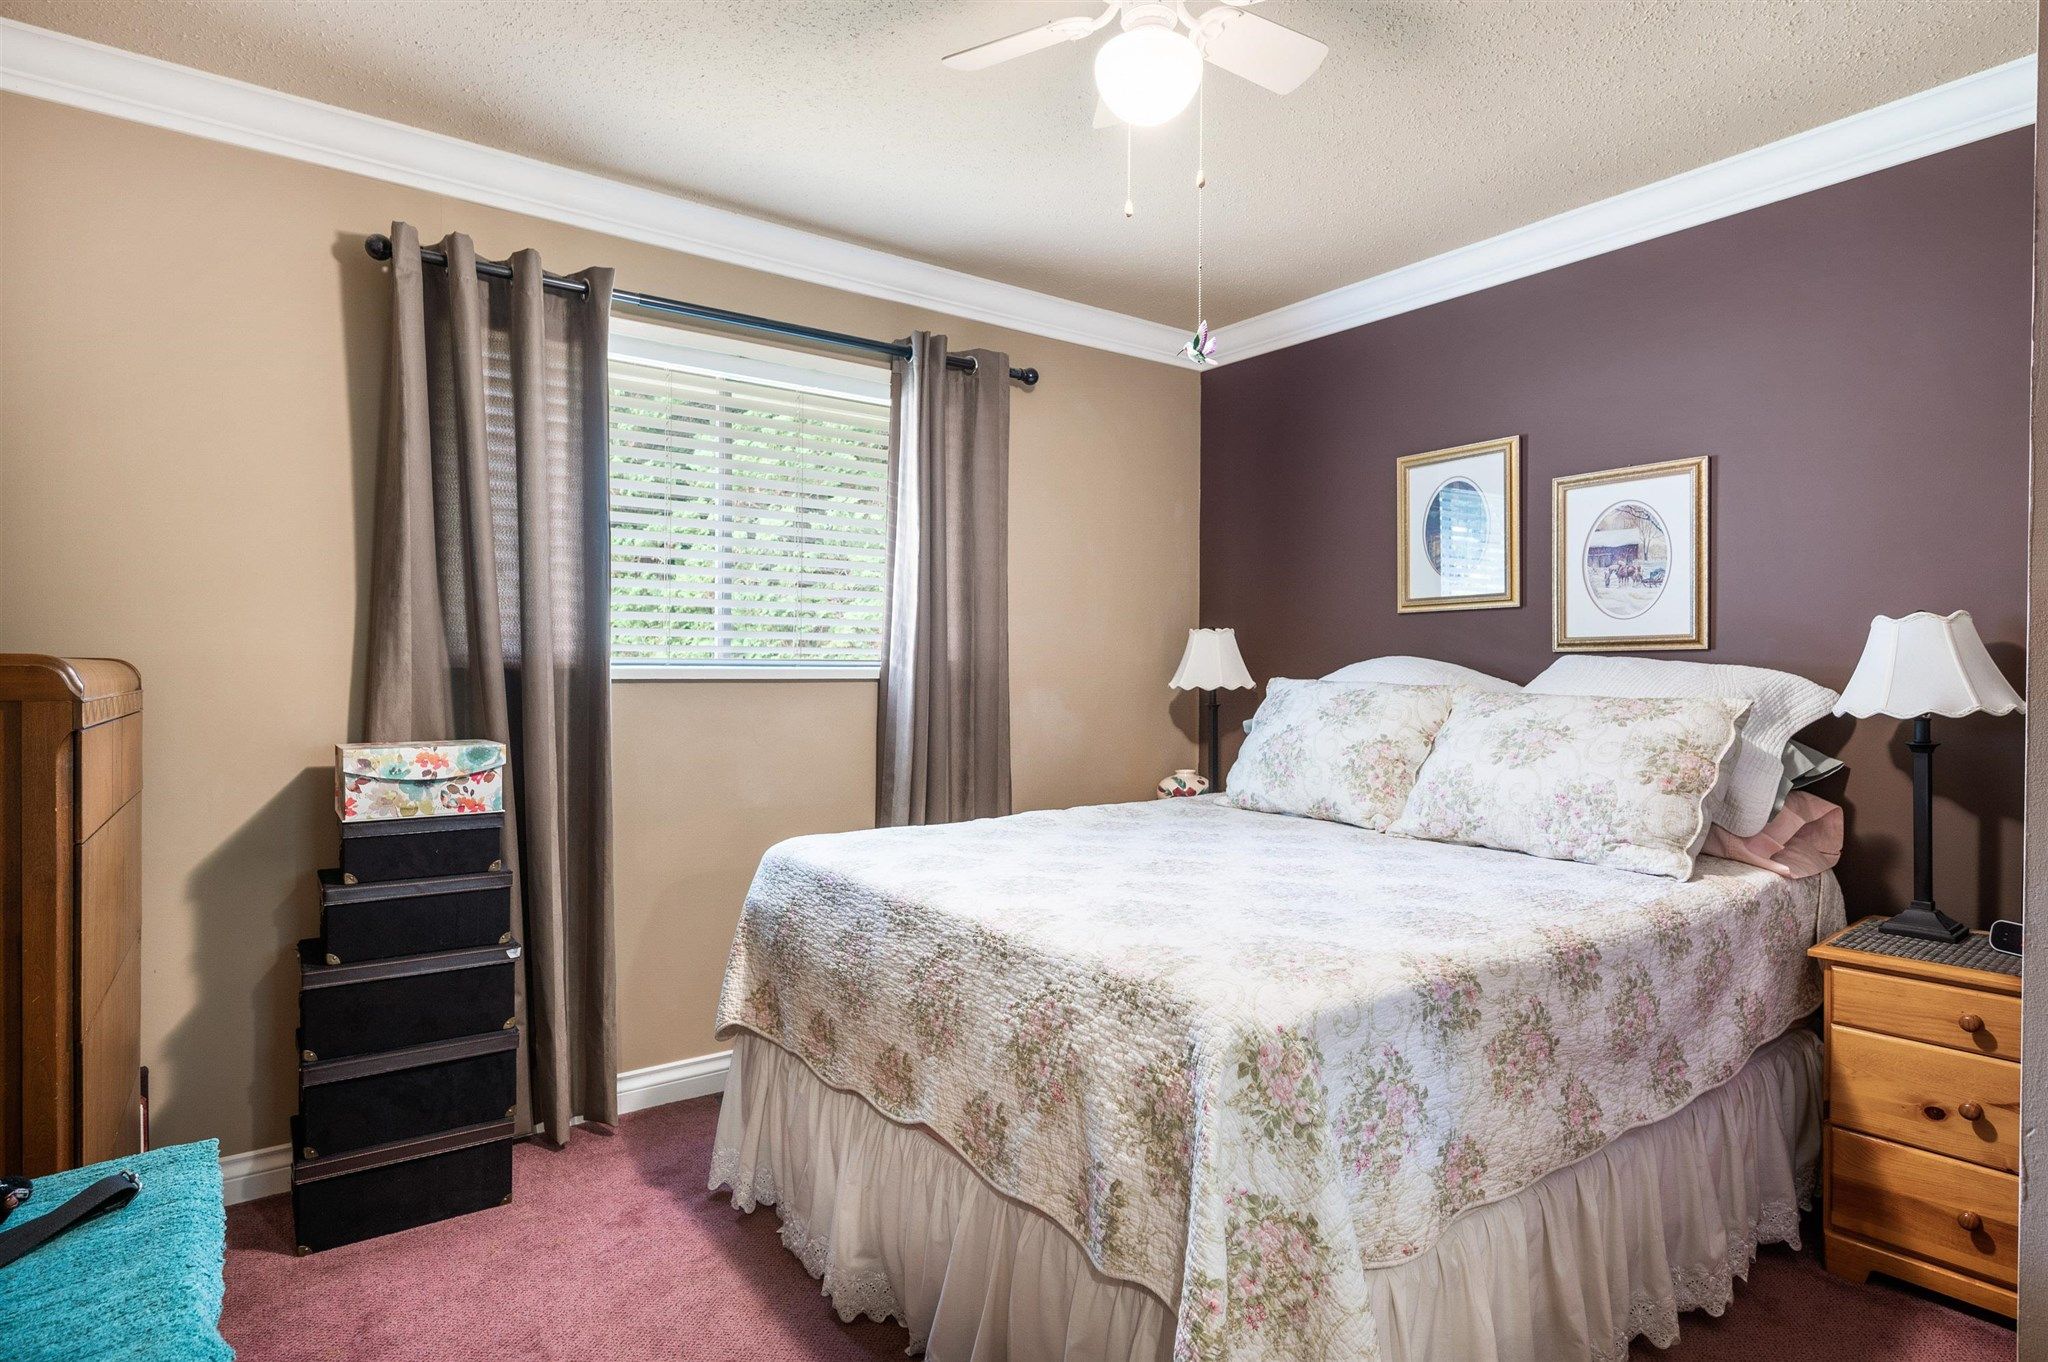 Photo 16: Photos: 13889 115 Avenue in Surrey: Bolivar Heights House for sale (North Surrey)  : MLS®# R2608743